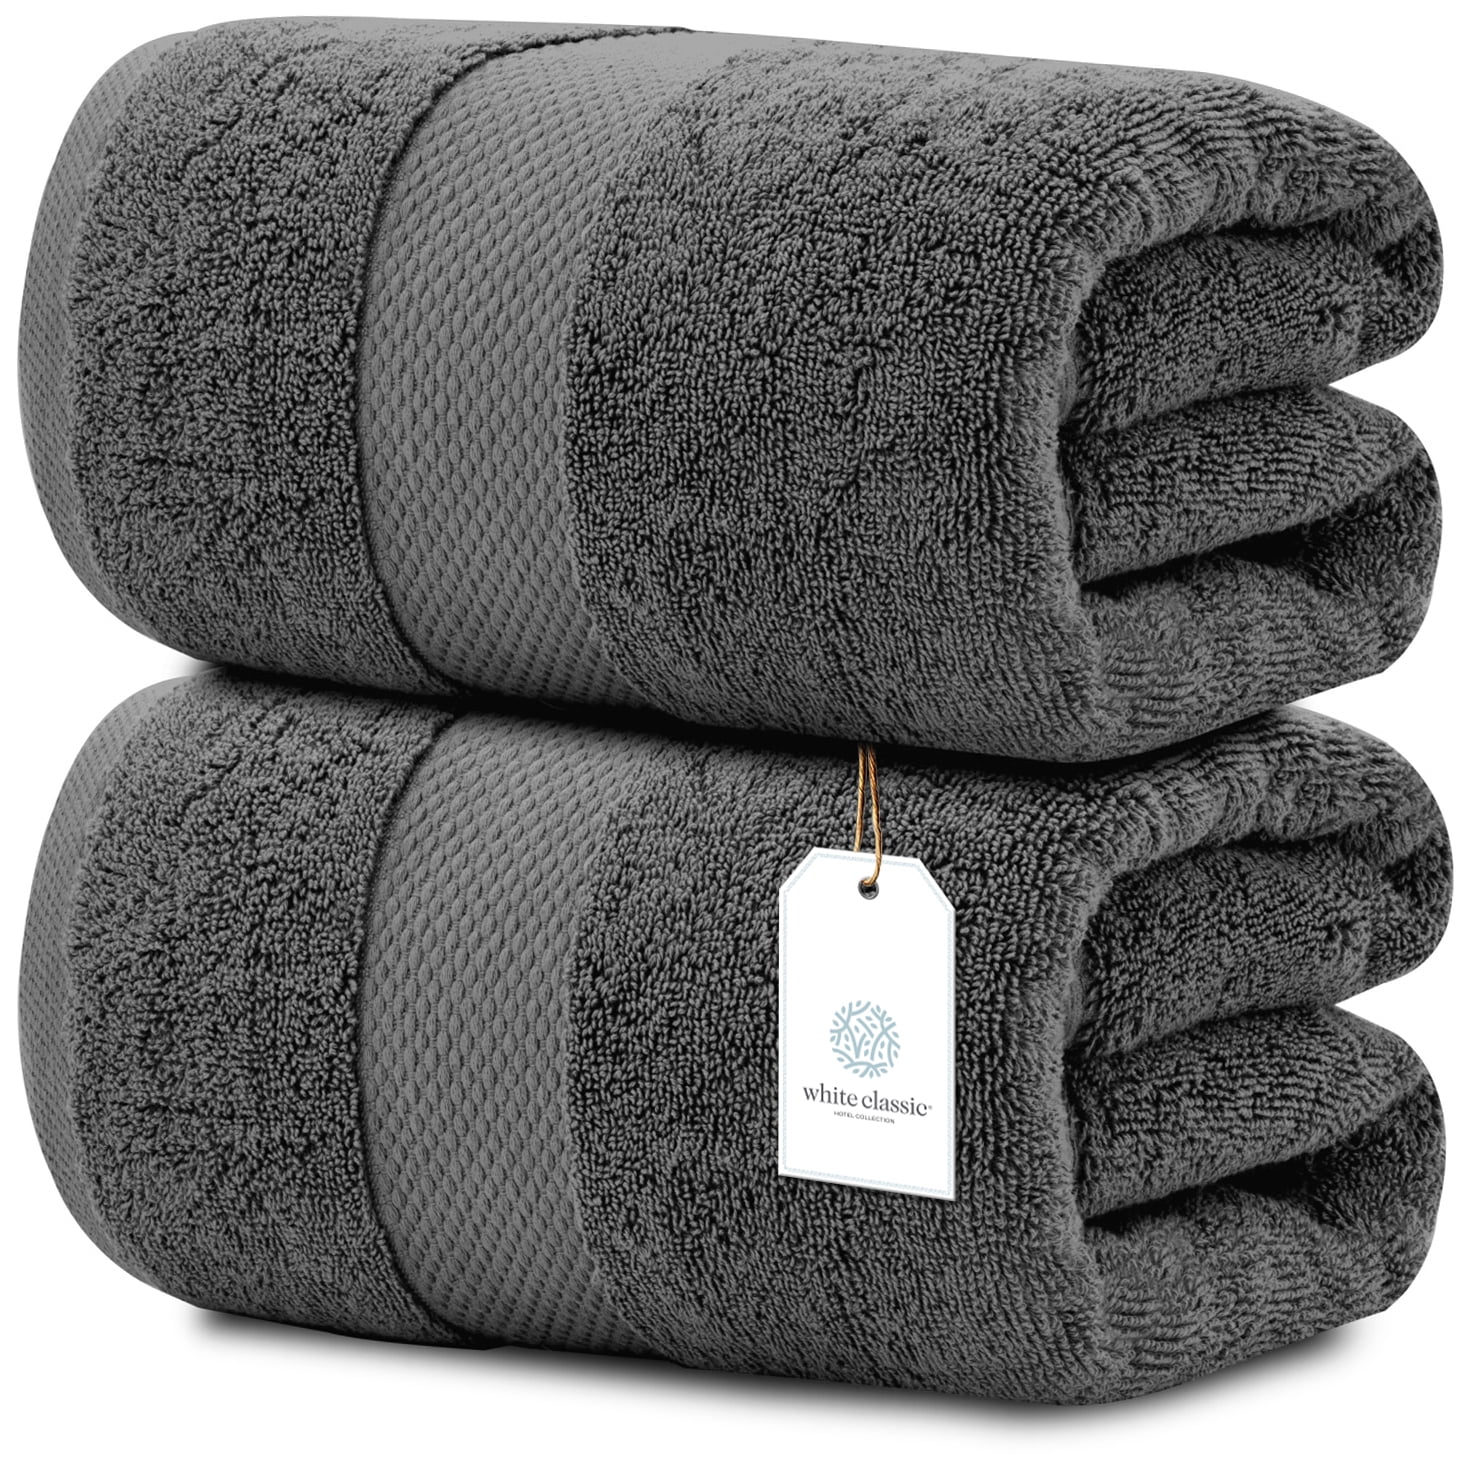 Soft Cotton Machine Washable Extra Large Bath Towel Gray 35-Inch-by-70-Inch 